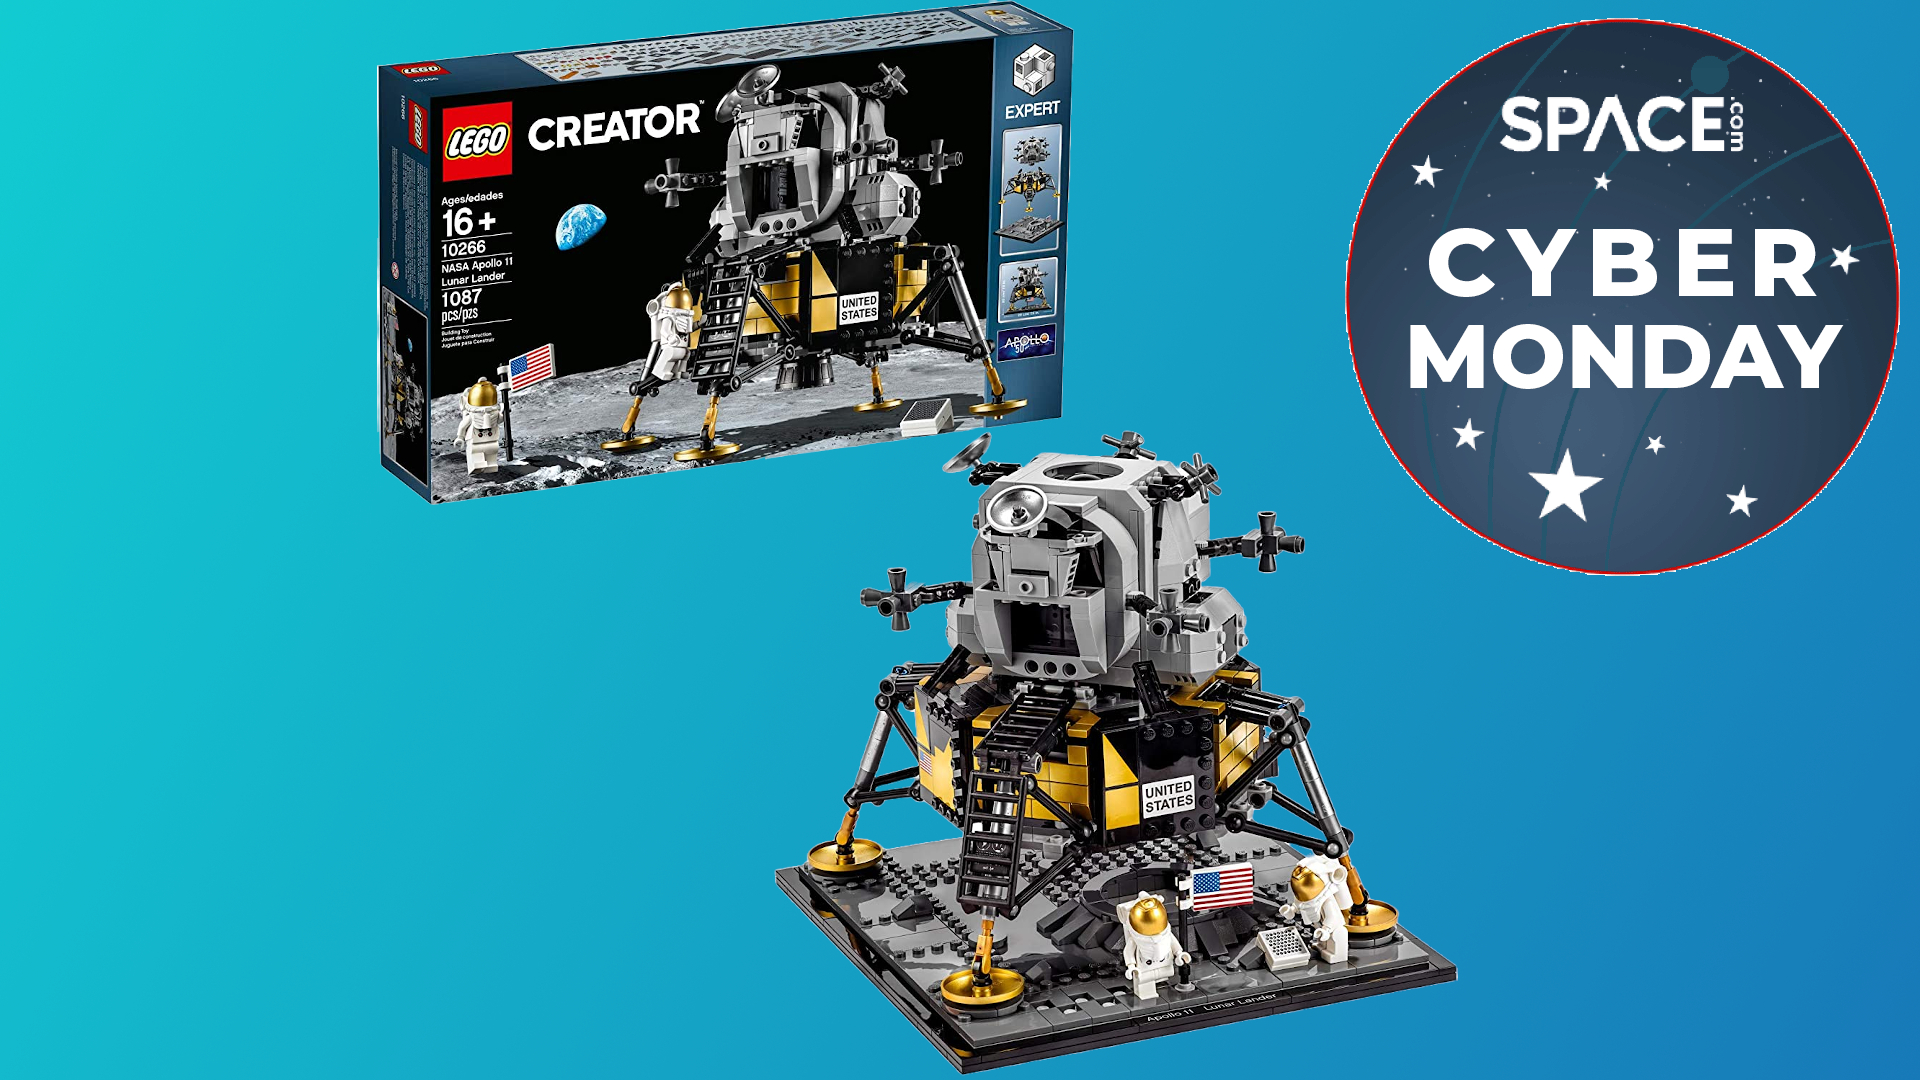 One small step for man, one giant 30% discount on this Lego NASA Lunar Lander in Cyber Monday Lego deal